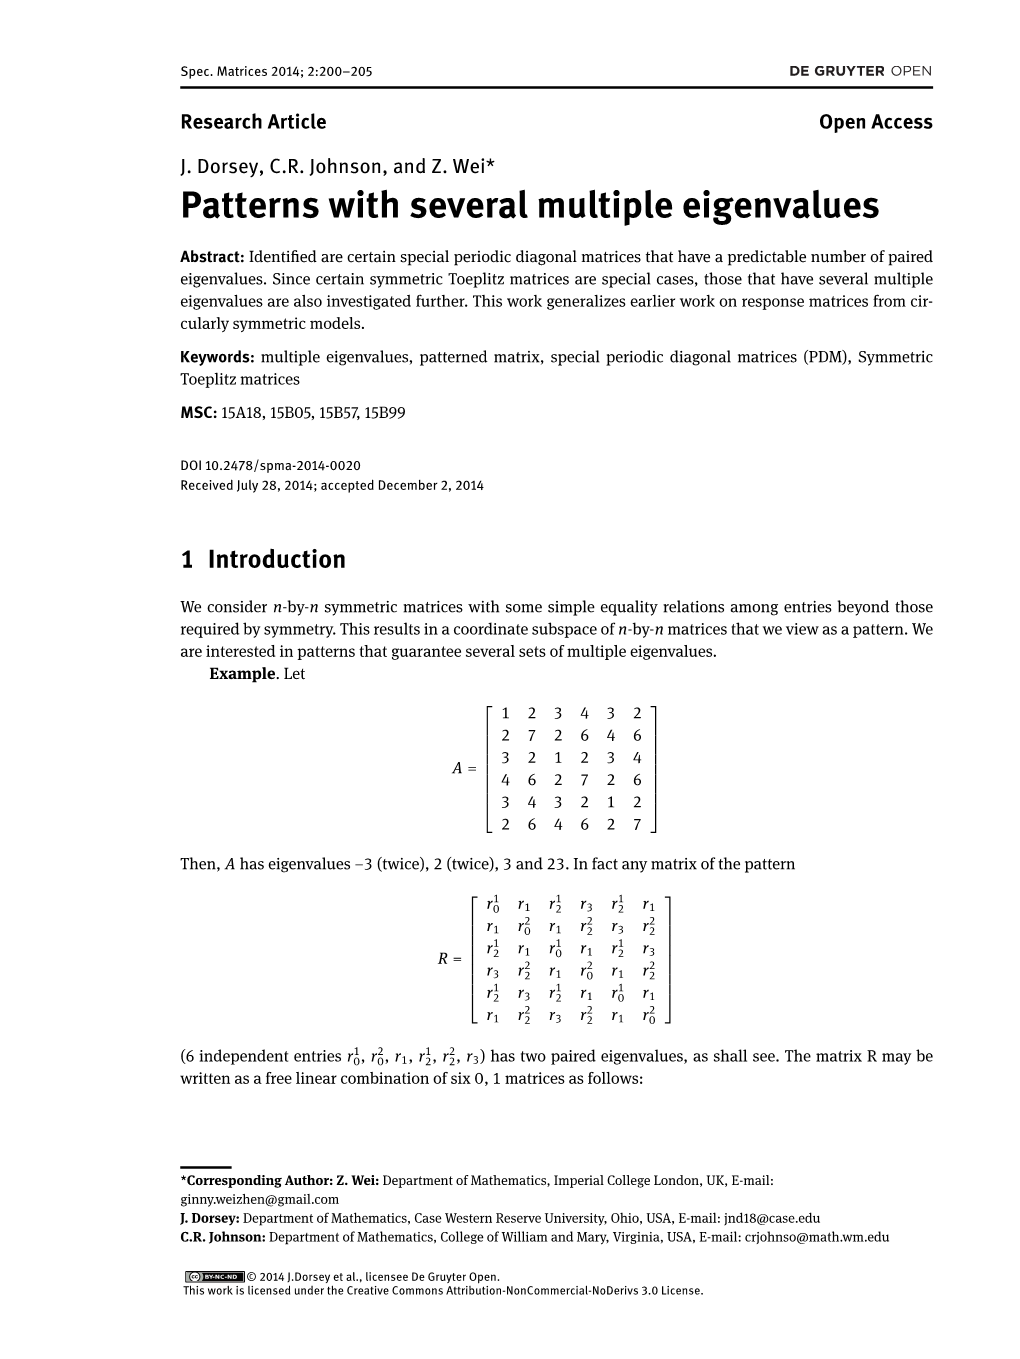 Patterns with Several Multiple Eigenvalues